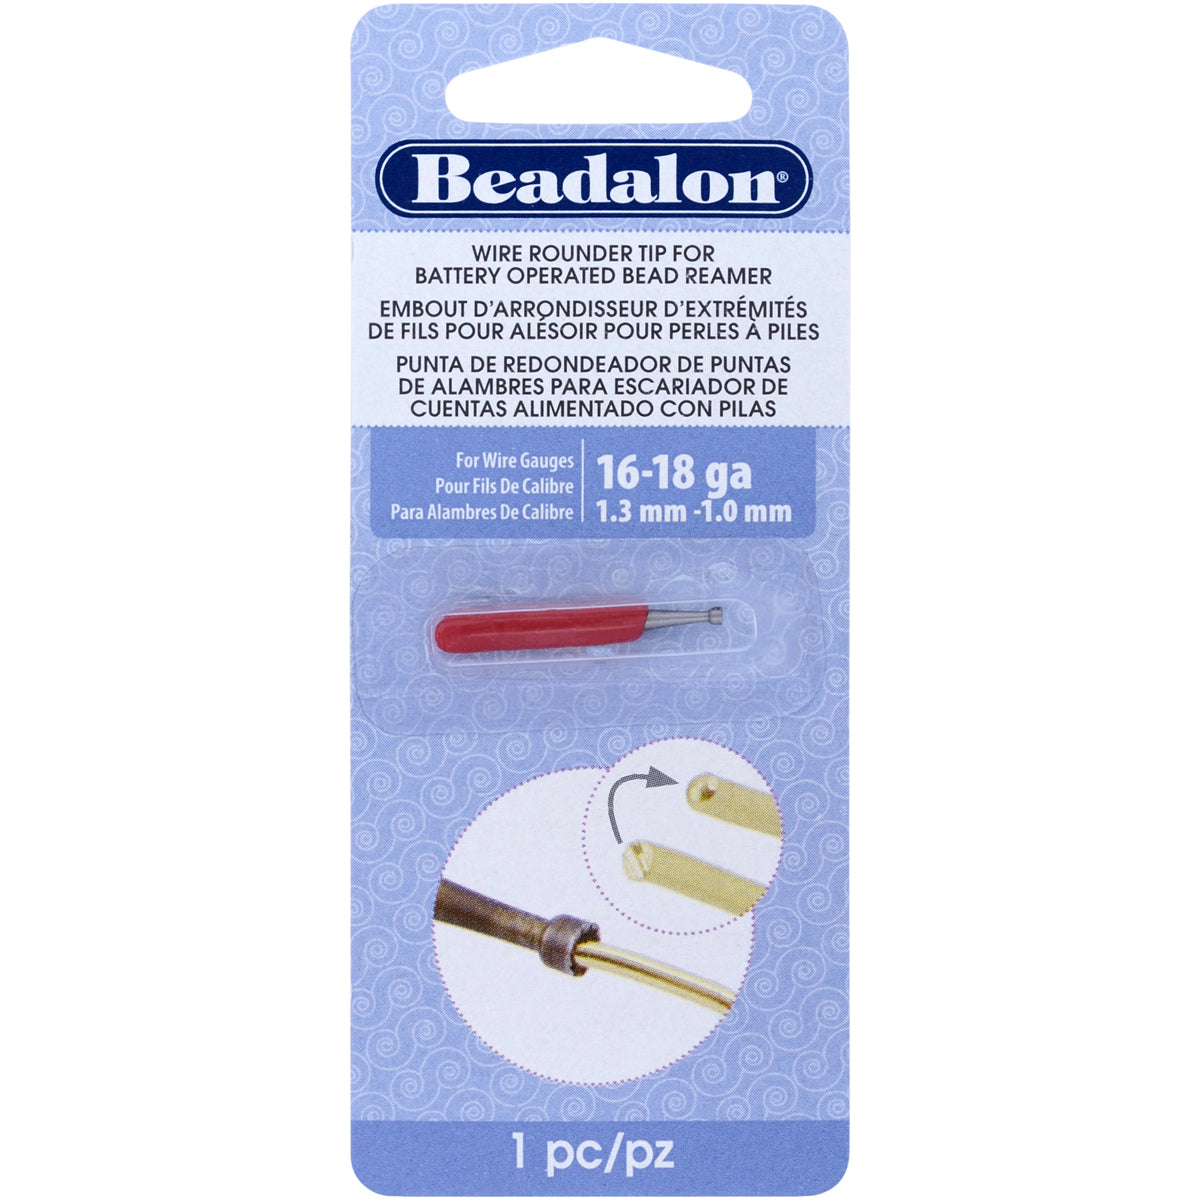 Beadalon : Wire Rounder Tip For Battery Operated Bead Reamer